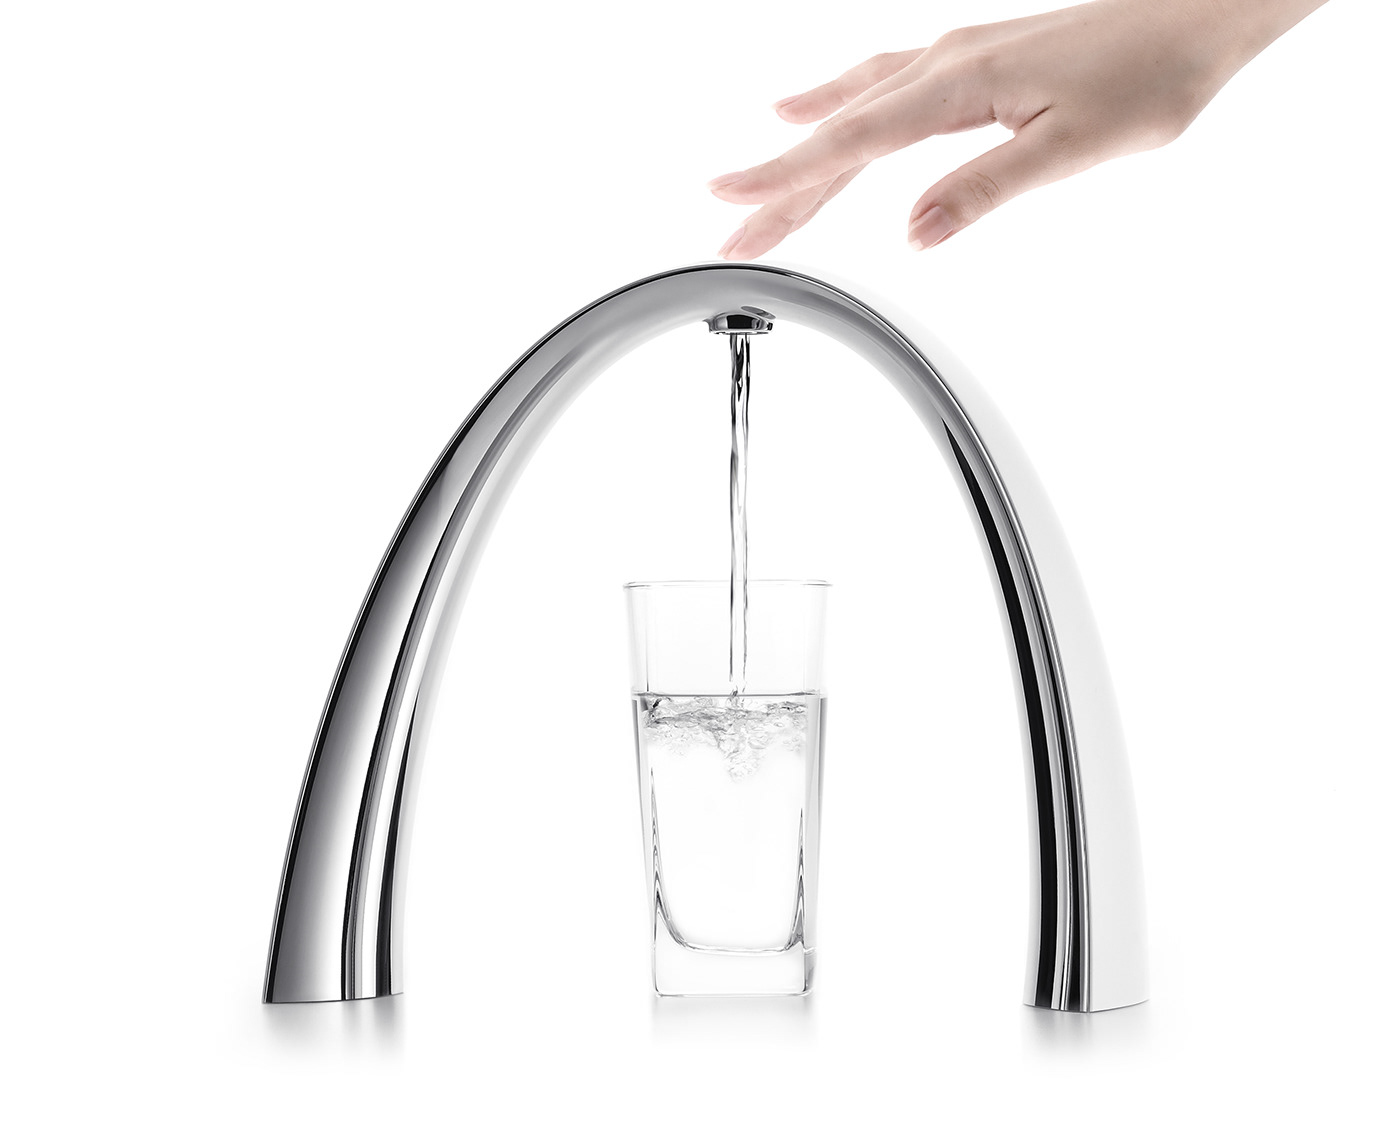 ARC, the electric faucet designed by designer Kim Seungwoo of Industrial design studio VLND.